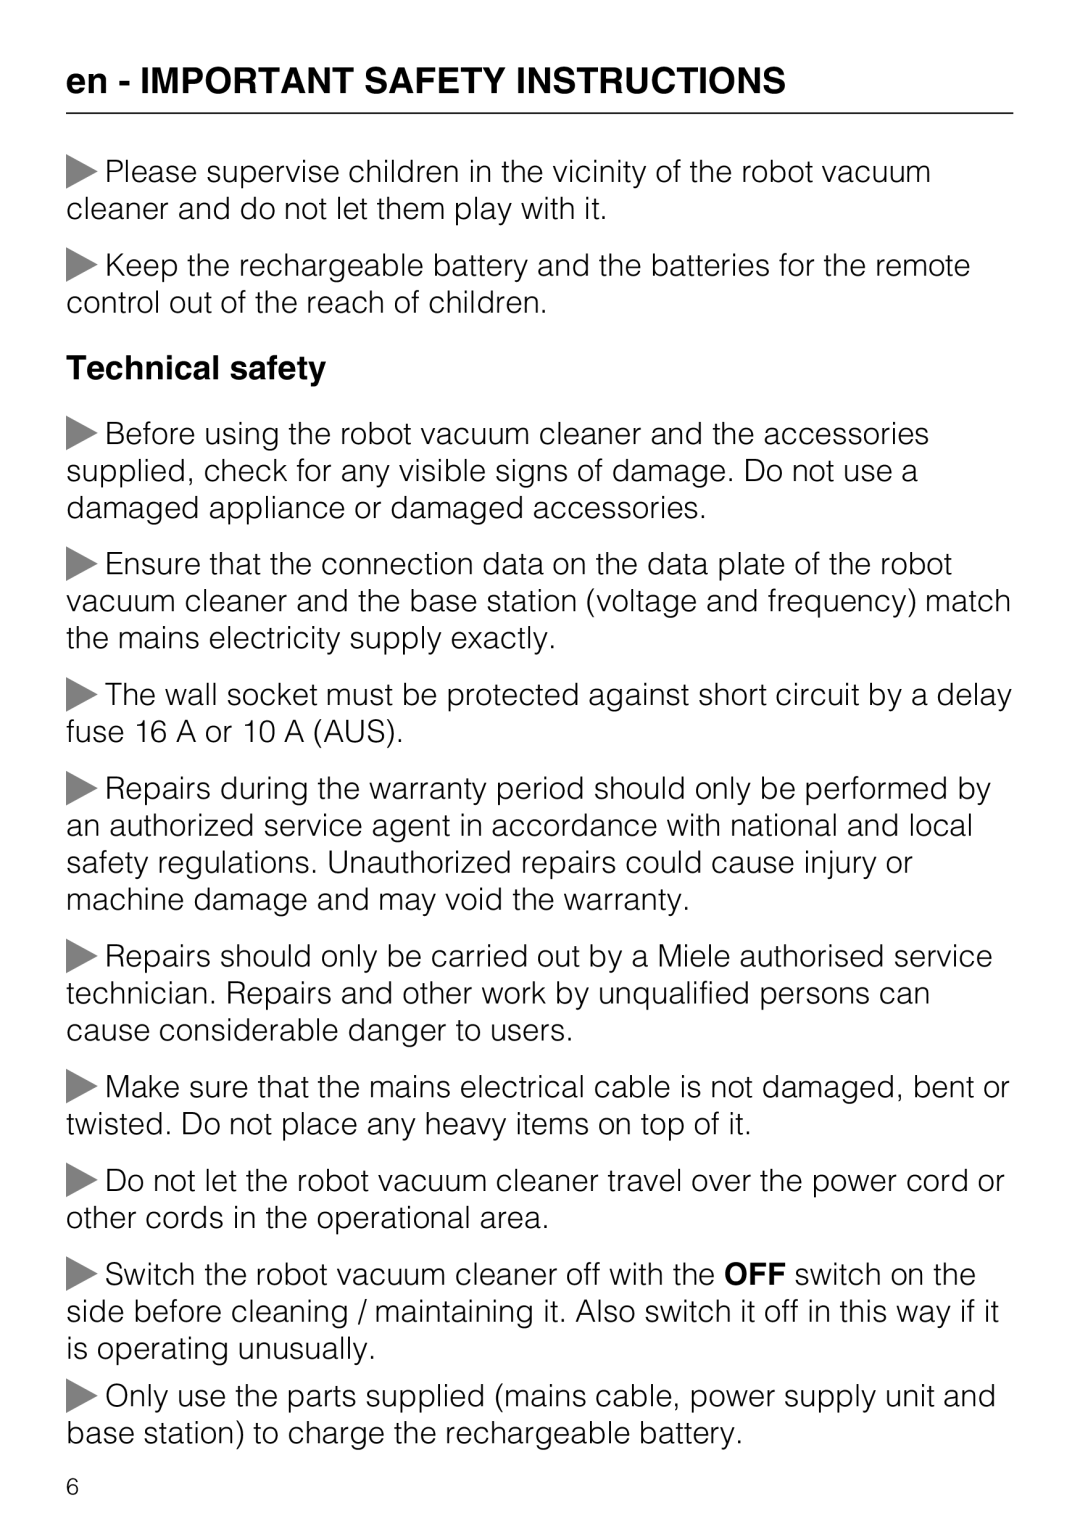 Miele HS17 manual Technical safety, en - IMPORTANT SAFETY INSTRUCTIONS 